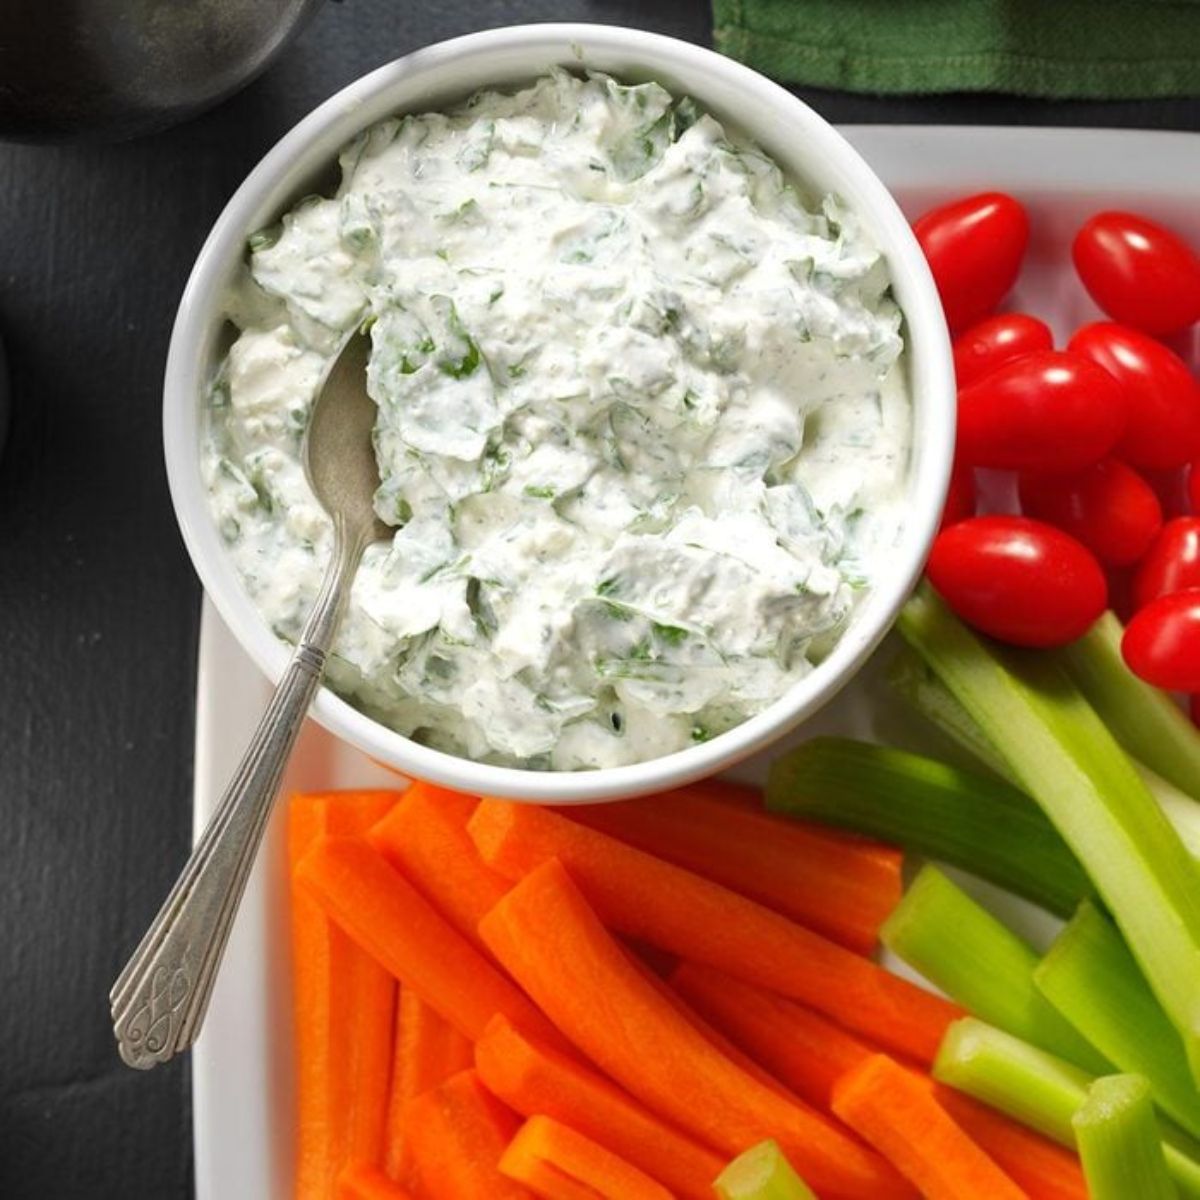 Creamy Feta Spinach Dip in a white bowl with a spoon on a tray with sliced veggies.